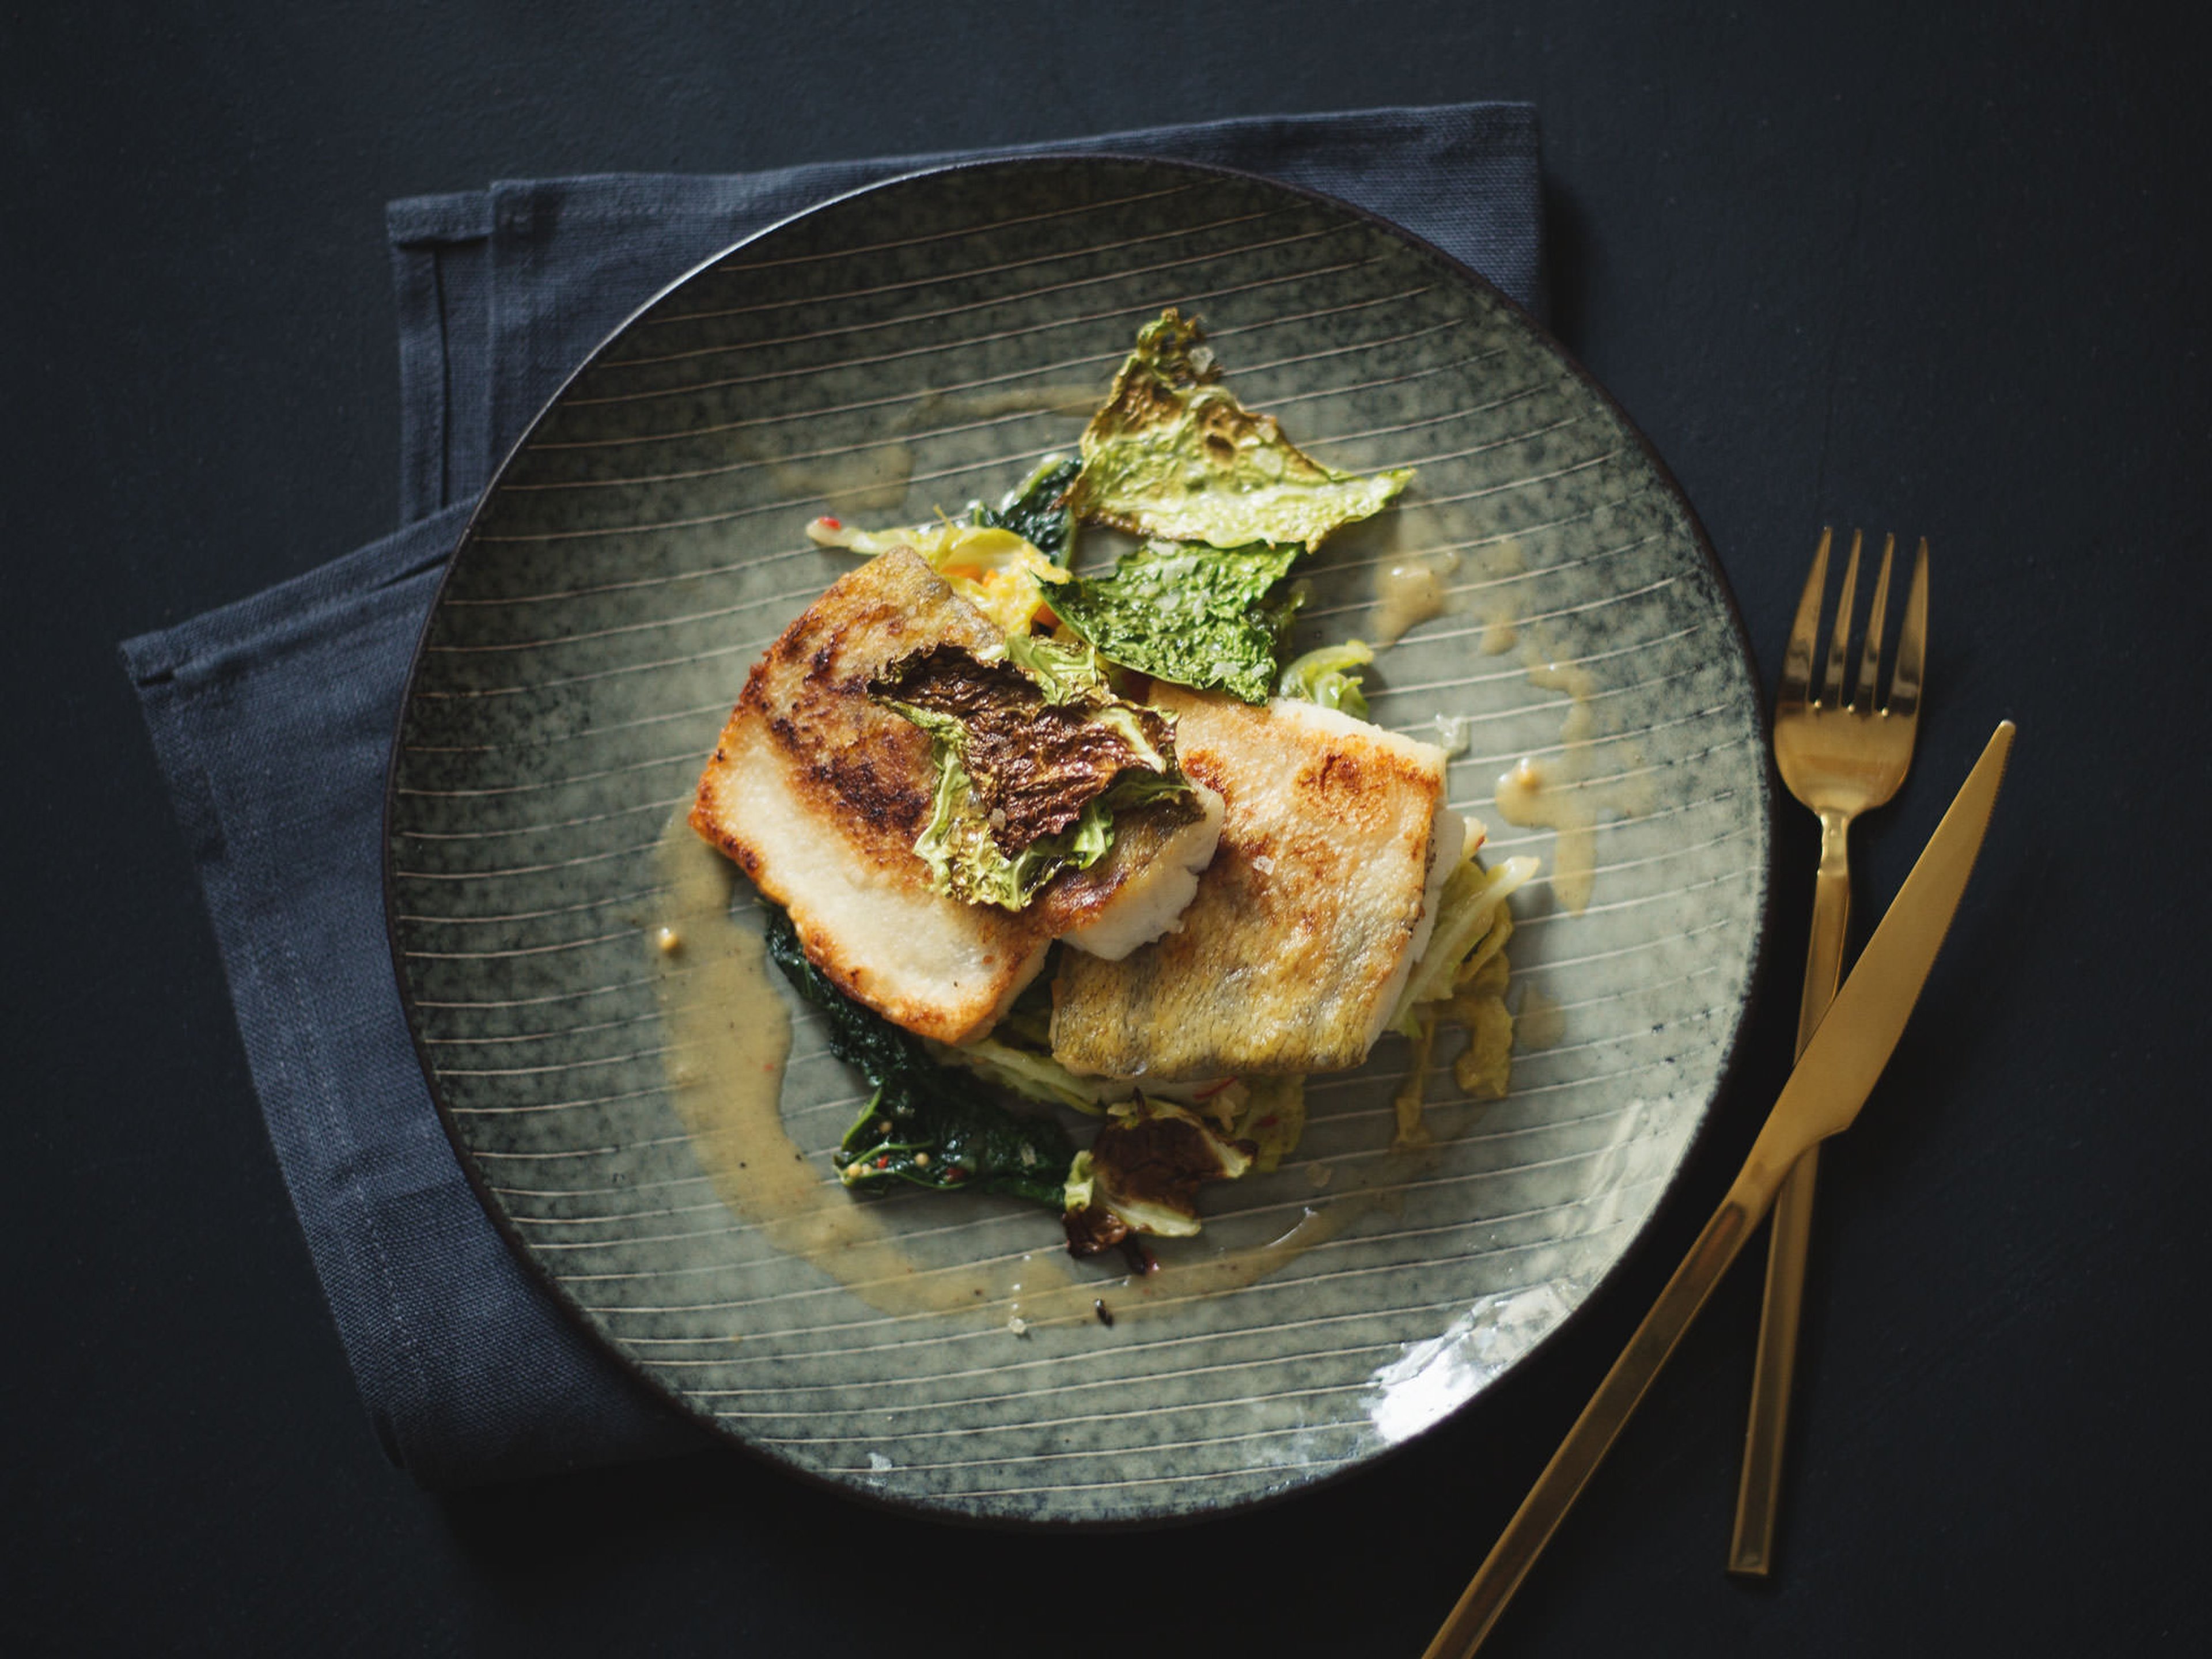 Perch filet with savoy cabbage